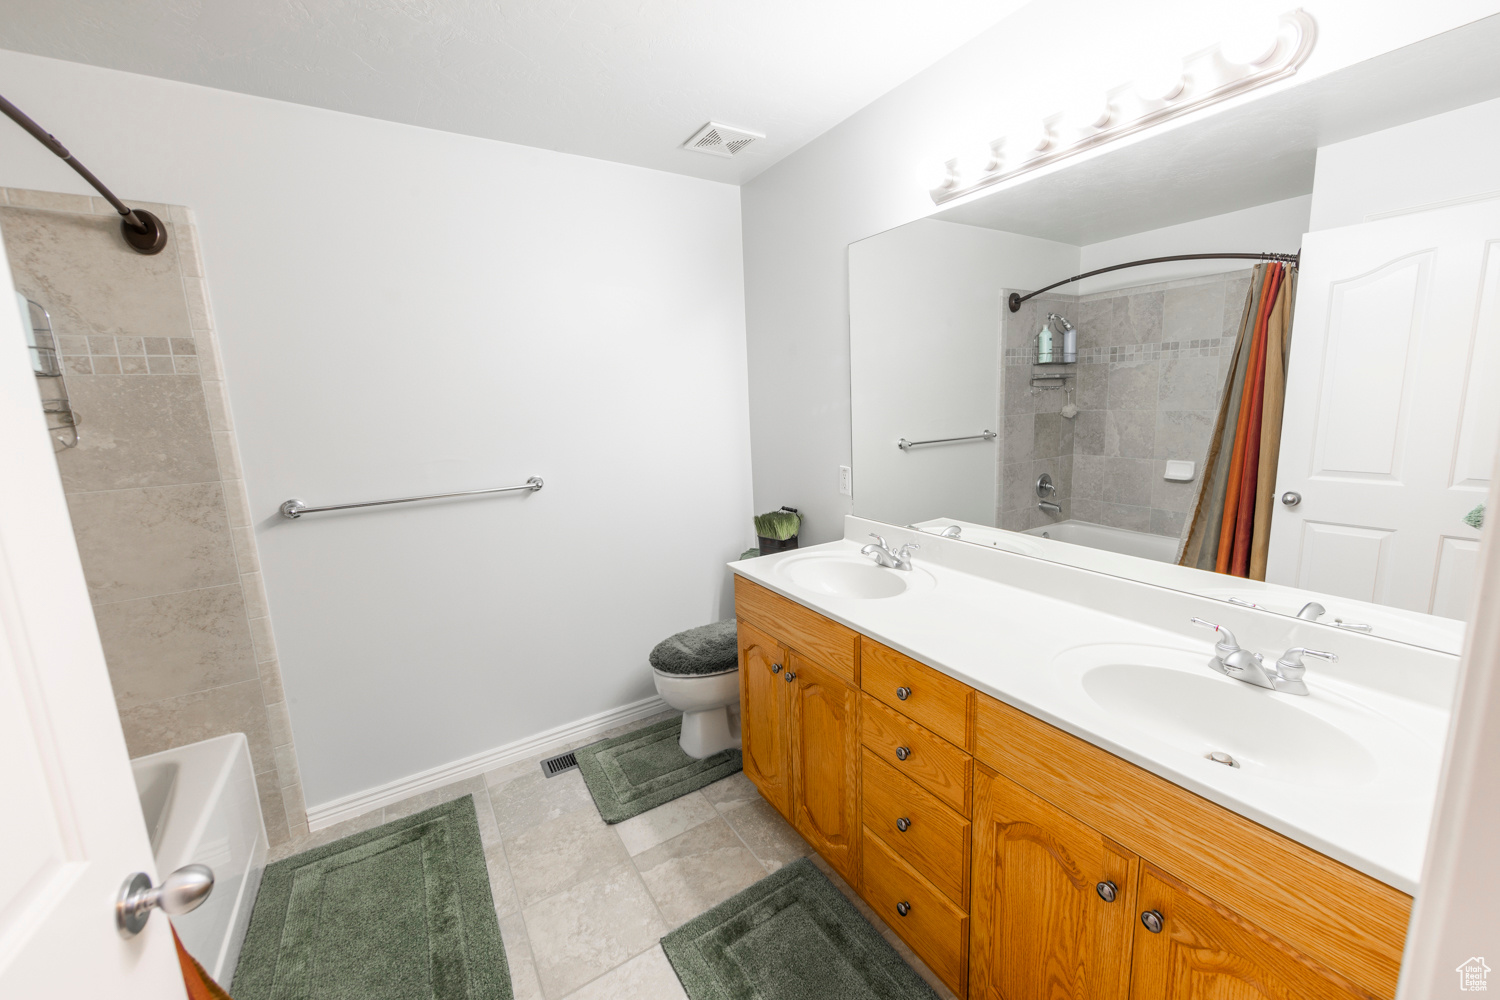 Full bathroom with dual sinks, oversized vanity, shower / tub combo with tile walls, and tile floors